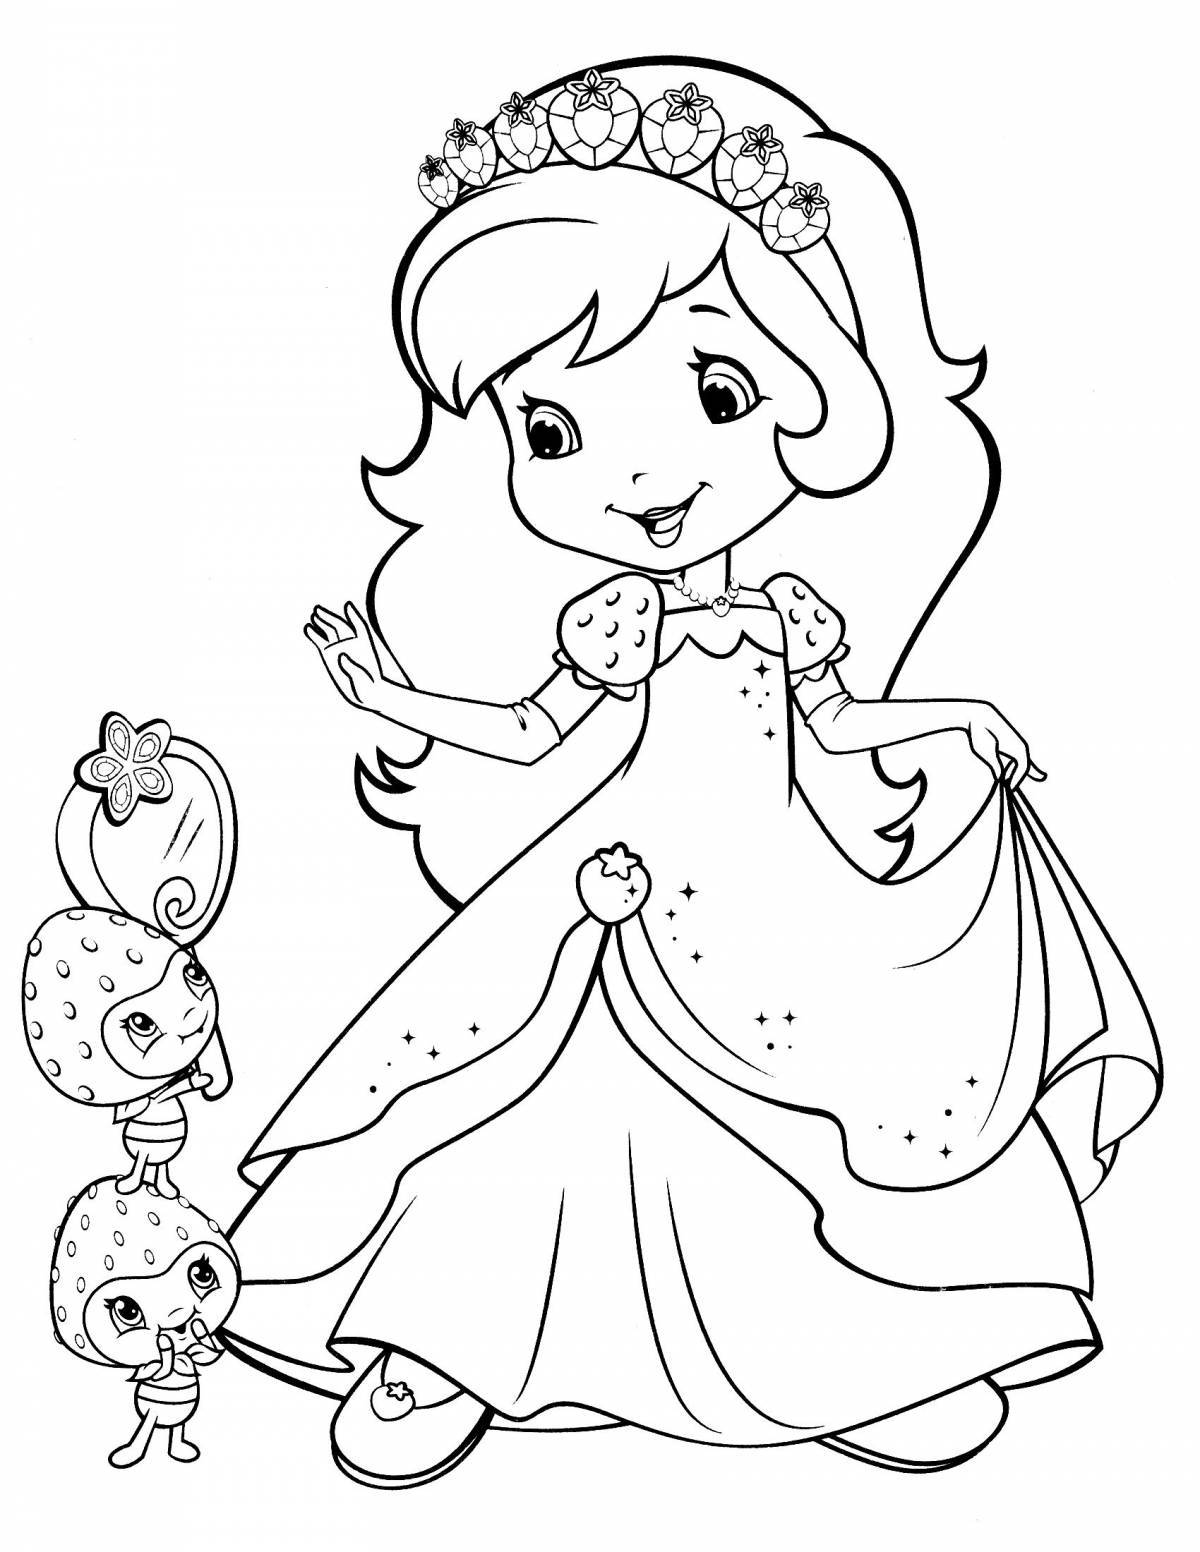 Colourful princess coloring pages for kids